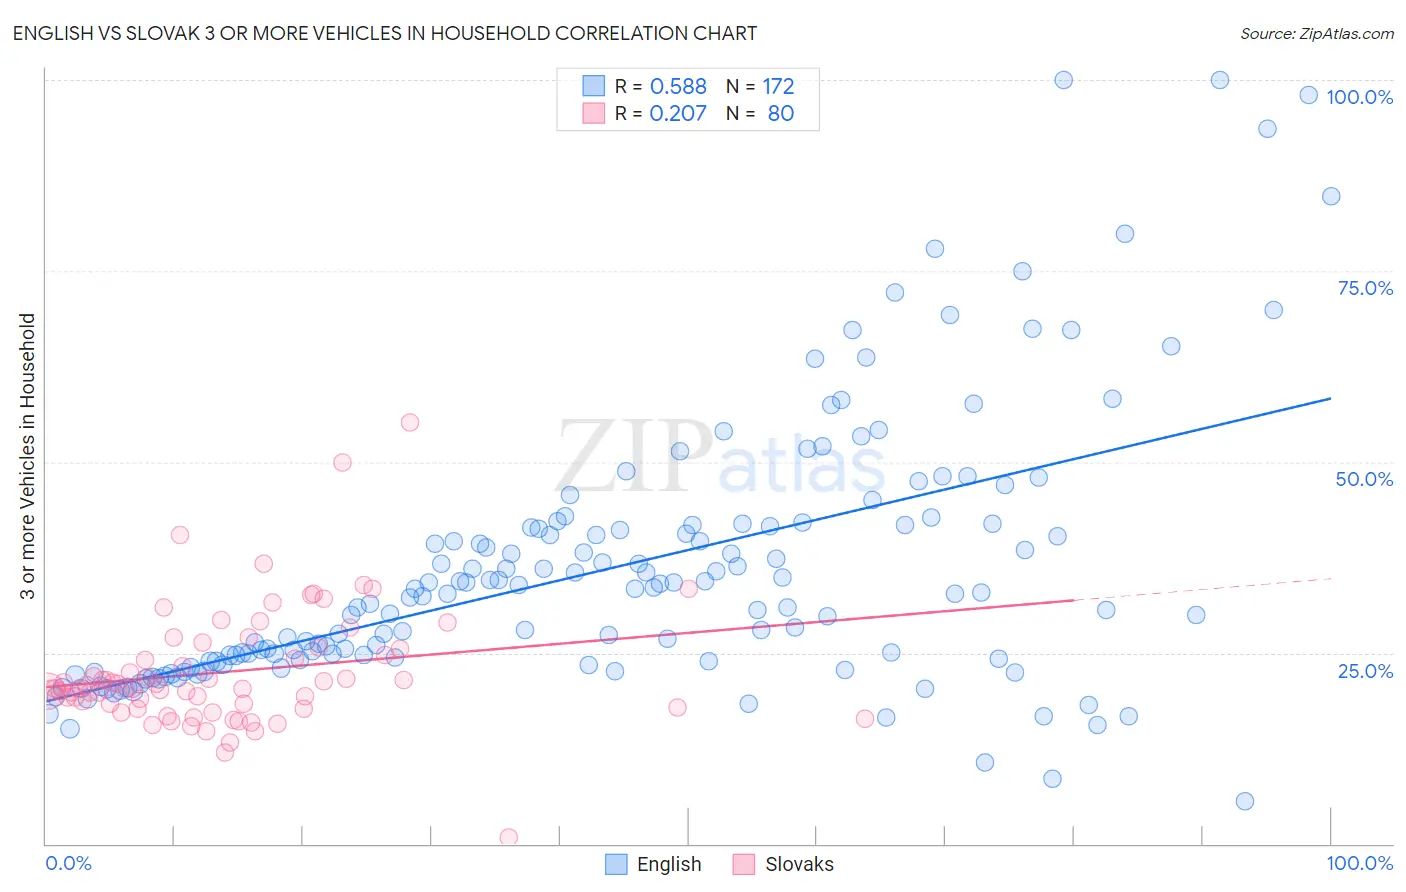 English vs Slovak 3 or more Vehicles in Household